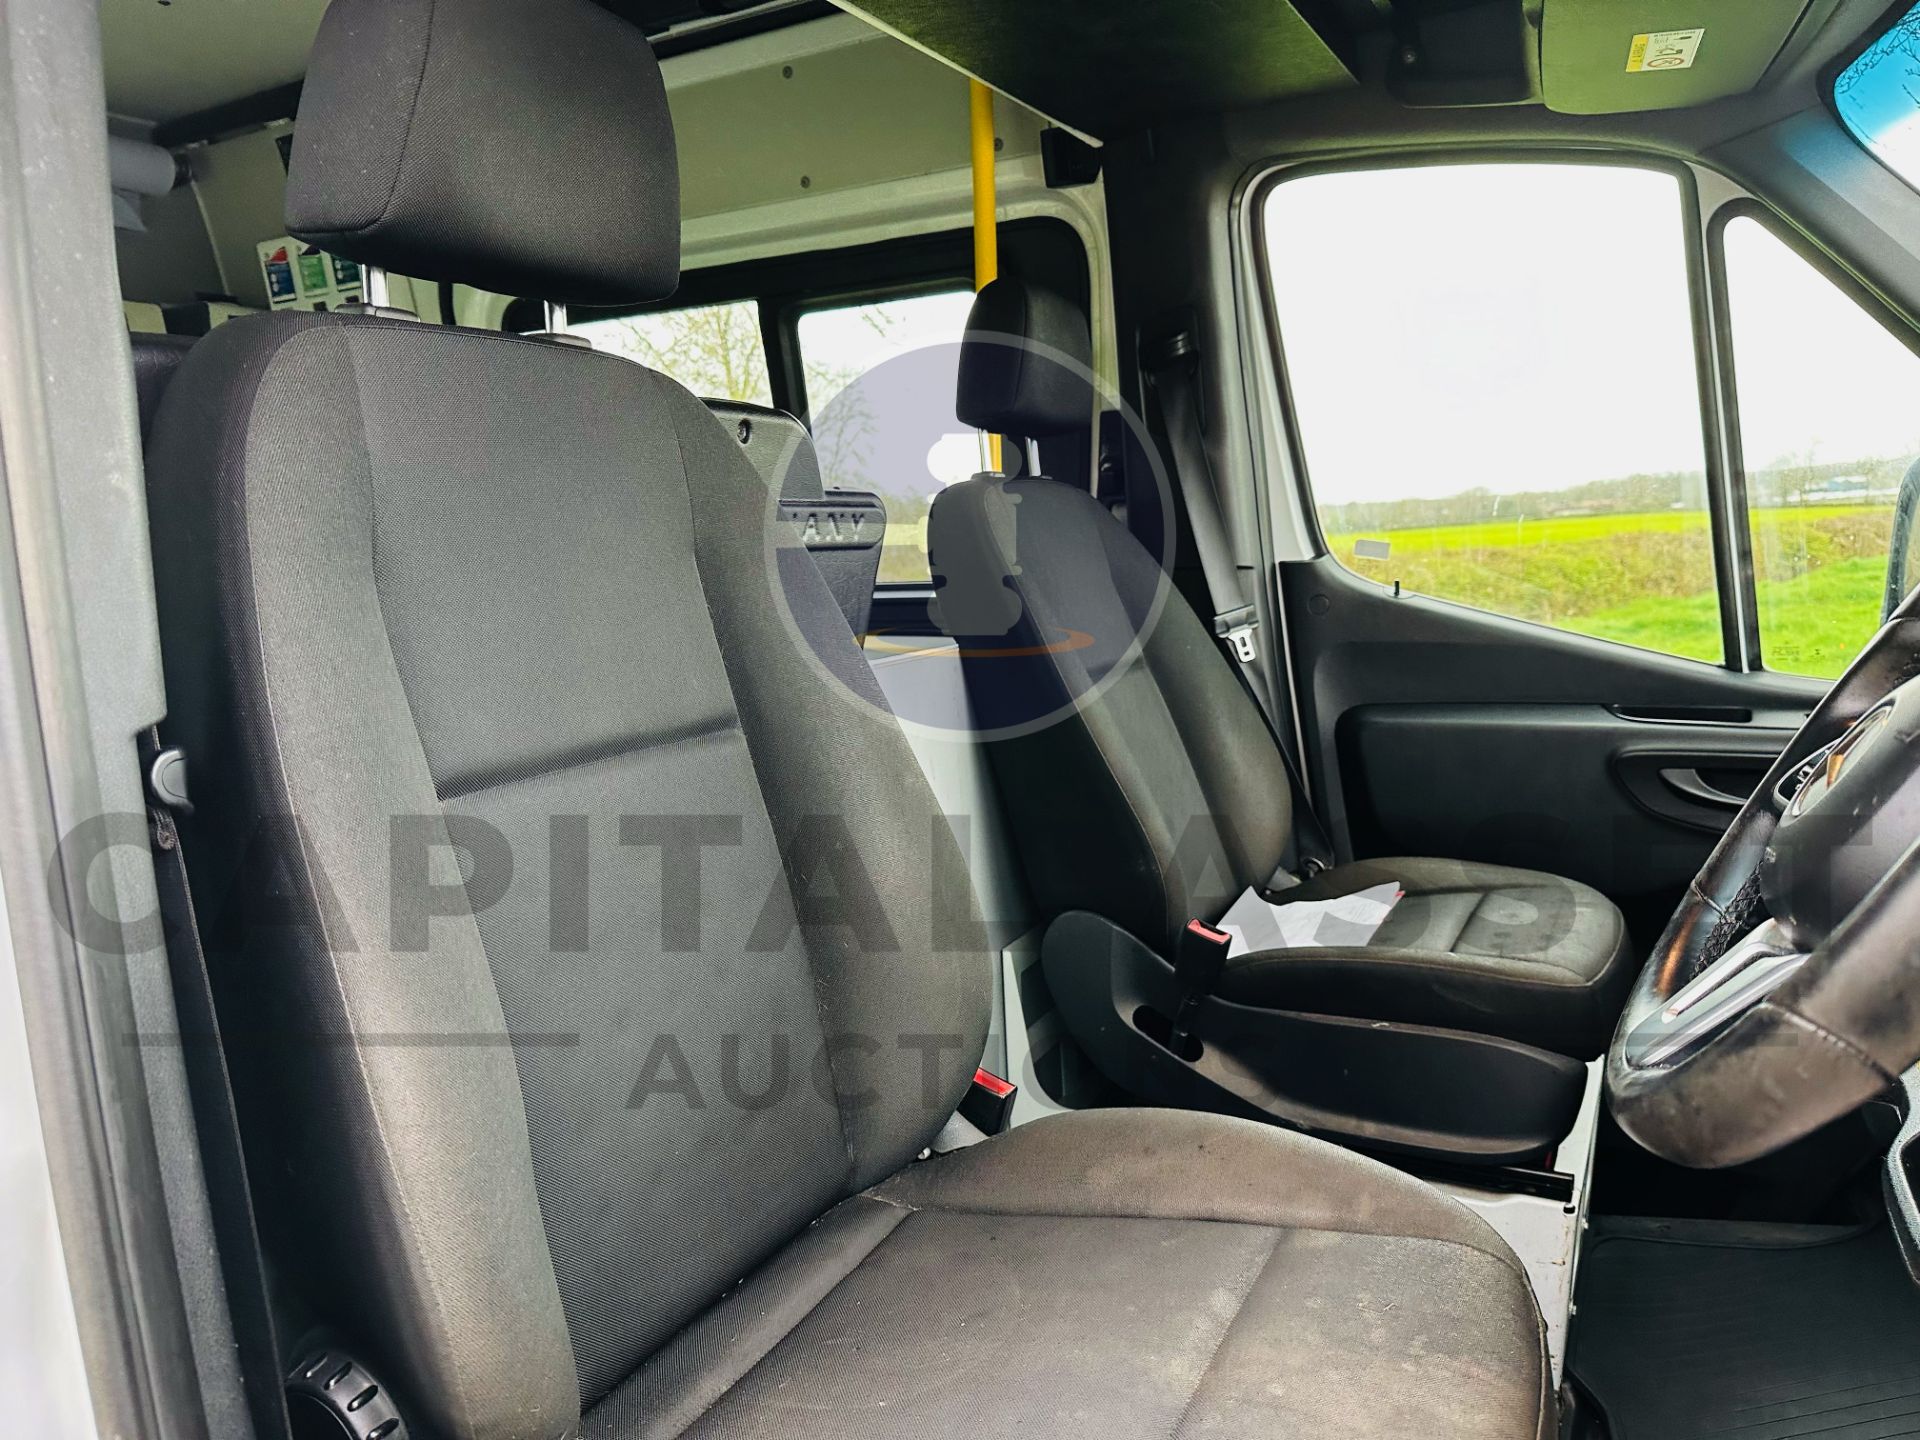 (ON SALE) MERCEDES SPRINTER 314CDI AUTO MWB MESSING UNIT WITH W/C,MICROWAVE,- 2020 REG- - AIR CON - Image 30 of 44